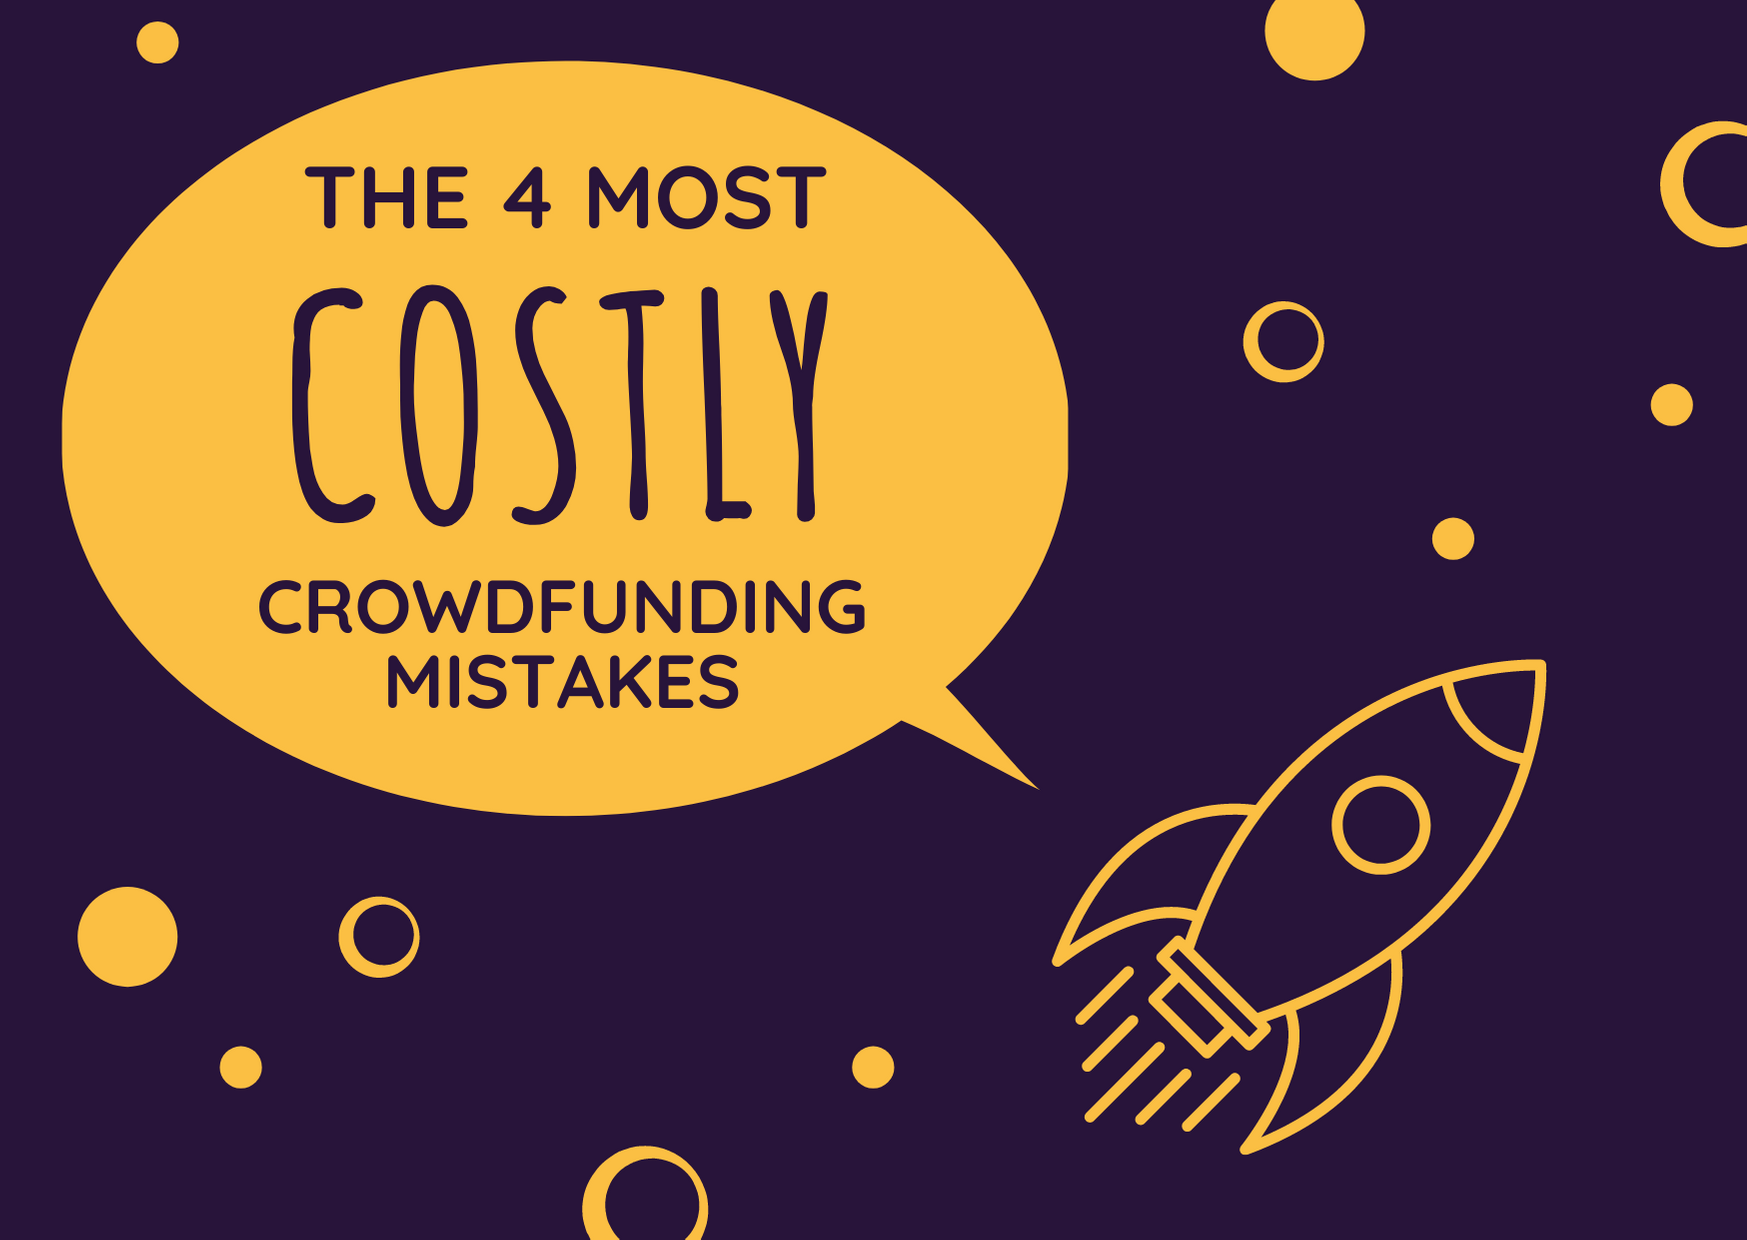 Don’t make a costly crowdfunding mistake